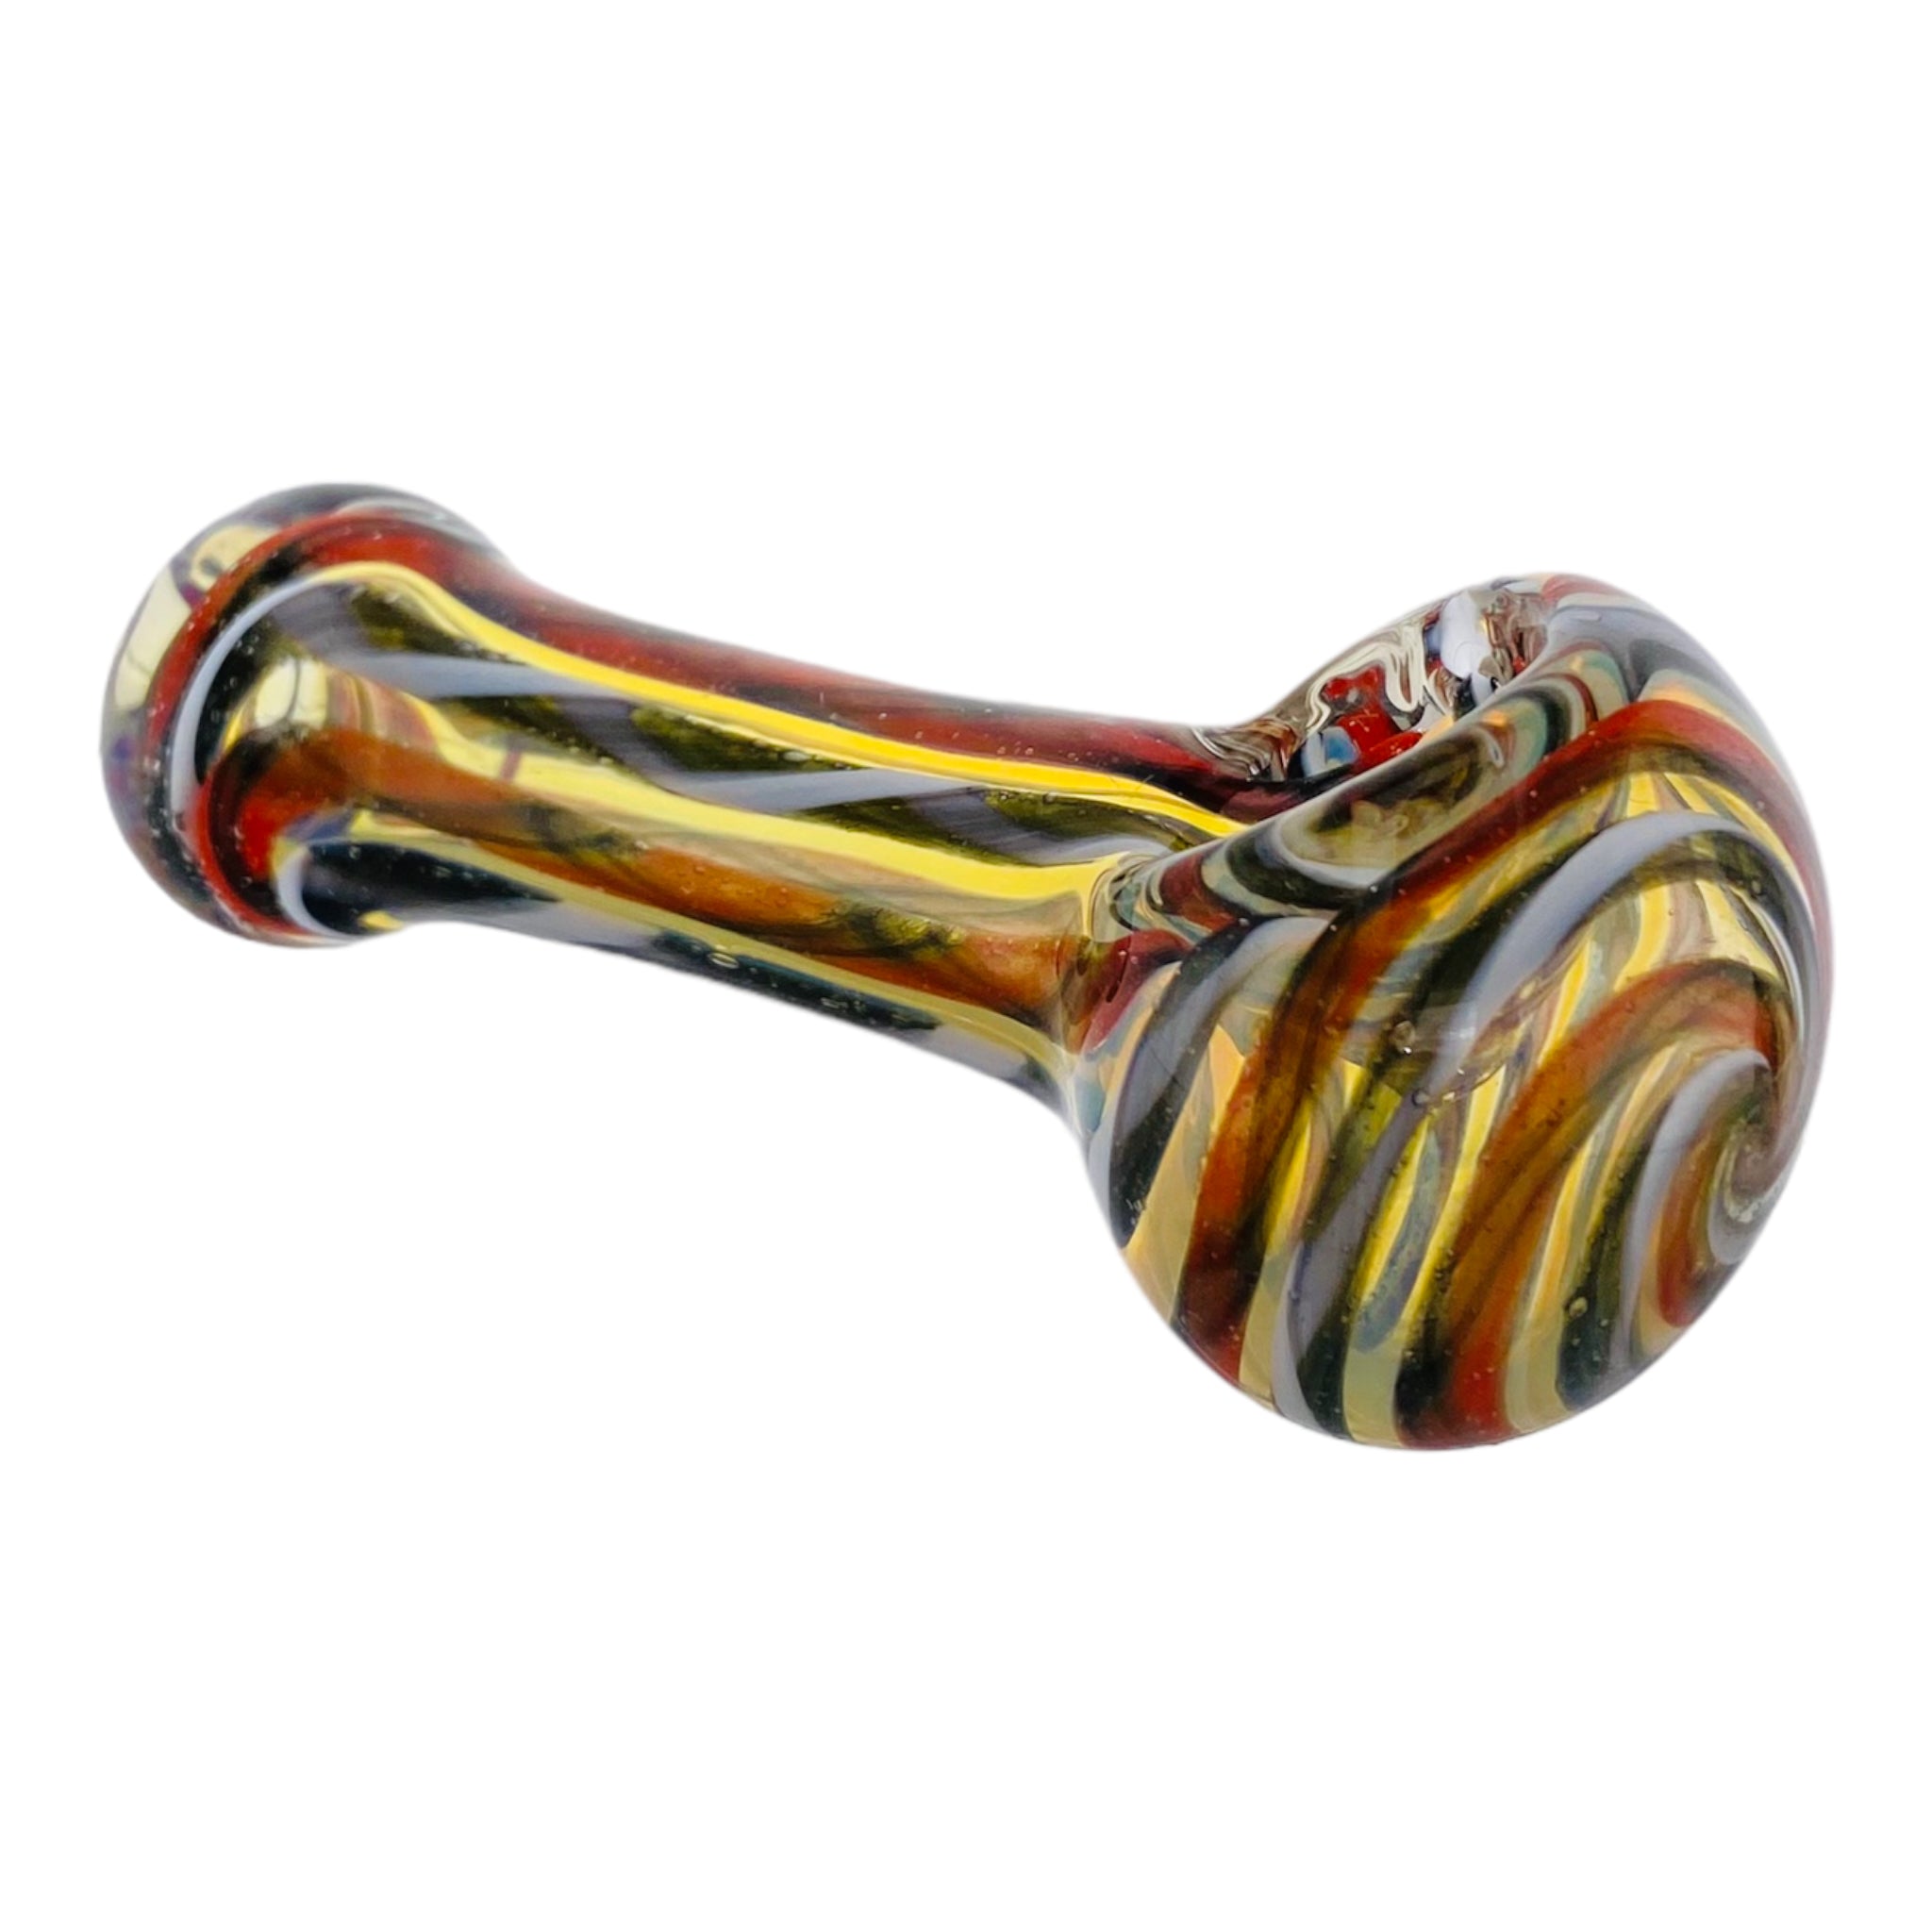 Basic Glass Spoon Pipe With Red White And Black Linework